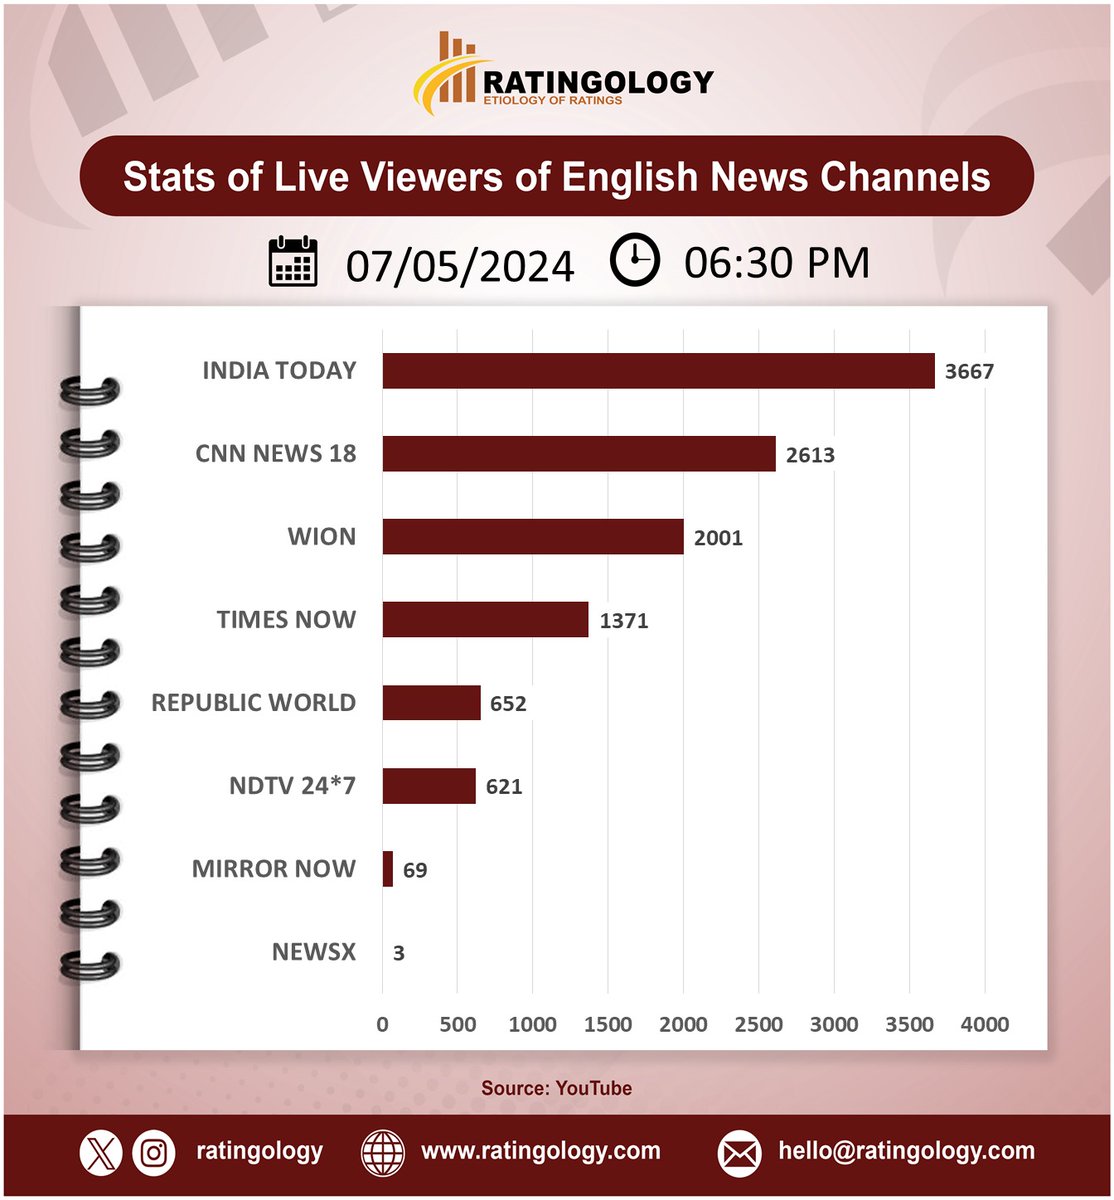 𝐒𝐭𝐚𝐭𝐬 𝐨𝐟 𝐥𝐢𝐯𝐞 𝐯𝐢𝐞𝐰𝐞𝐫𝐬 𝐨𝐧 #Youtube of #EnglishMedia #channelsat 06:30pm, Date: 07/May/2024 #Ratingology #Mediastats #RatingsKaBaap #DataScience #IndiaToday #Wion #RepublicTV #CNNNews18 #TimesNow #NewsX #NDTV24x7 #MirrorNow